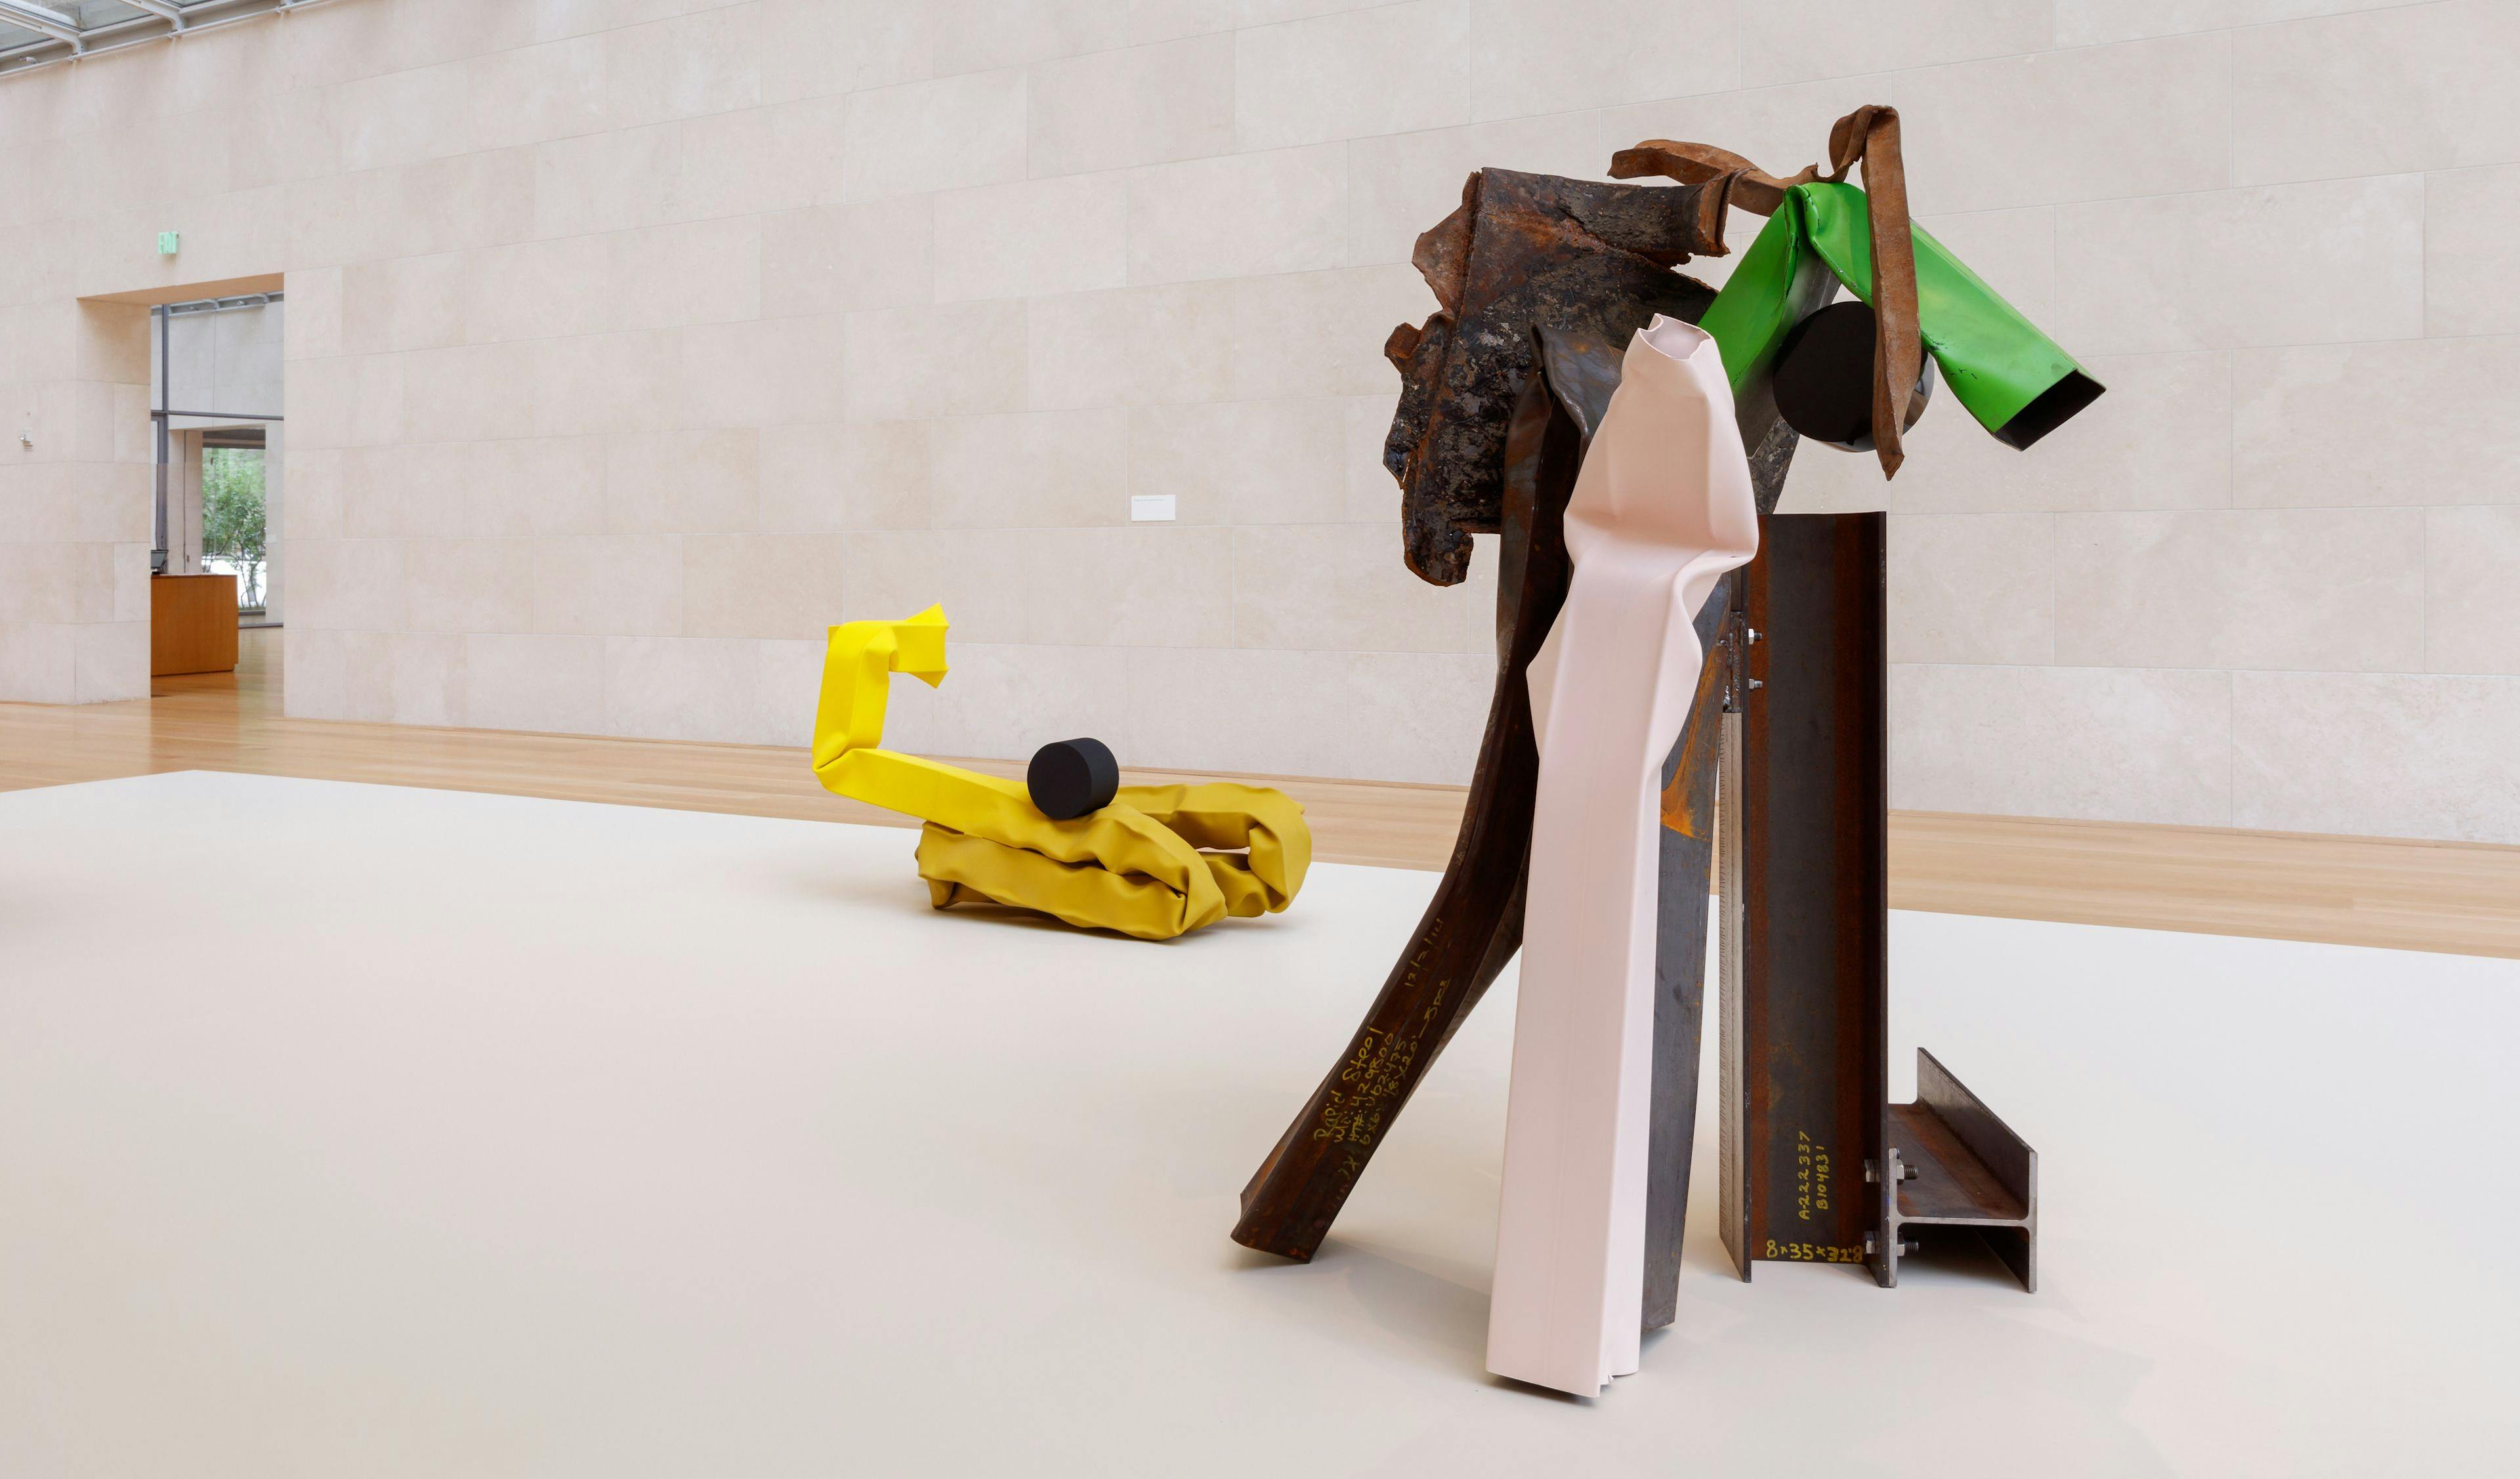 Installation view of the exhibition, Carol Bove: Collage Sculptures, at the Nasher Sculpture Center in Dallas, Texas, dated 2021.